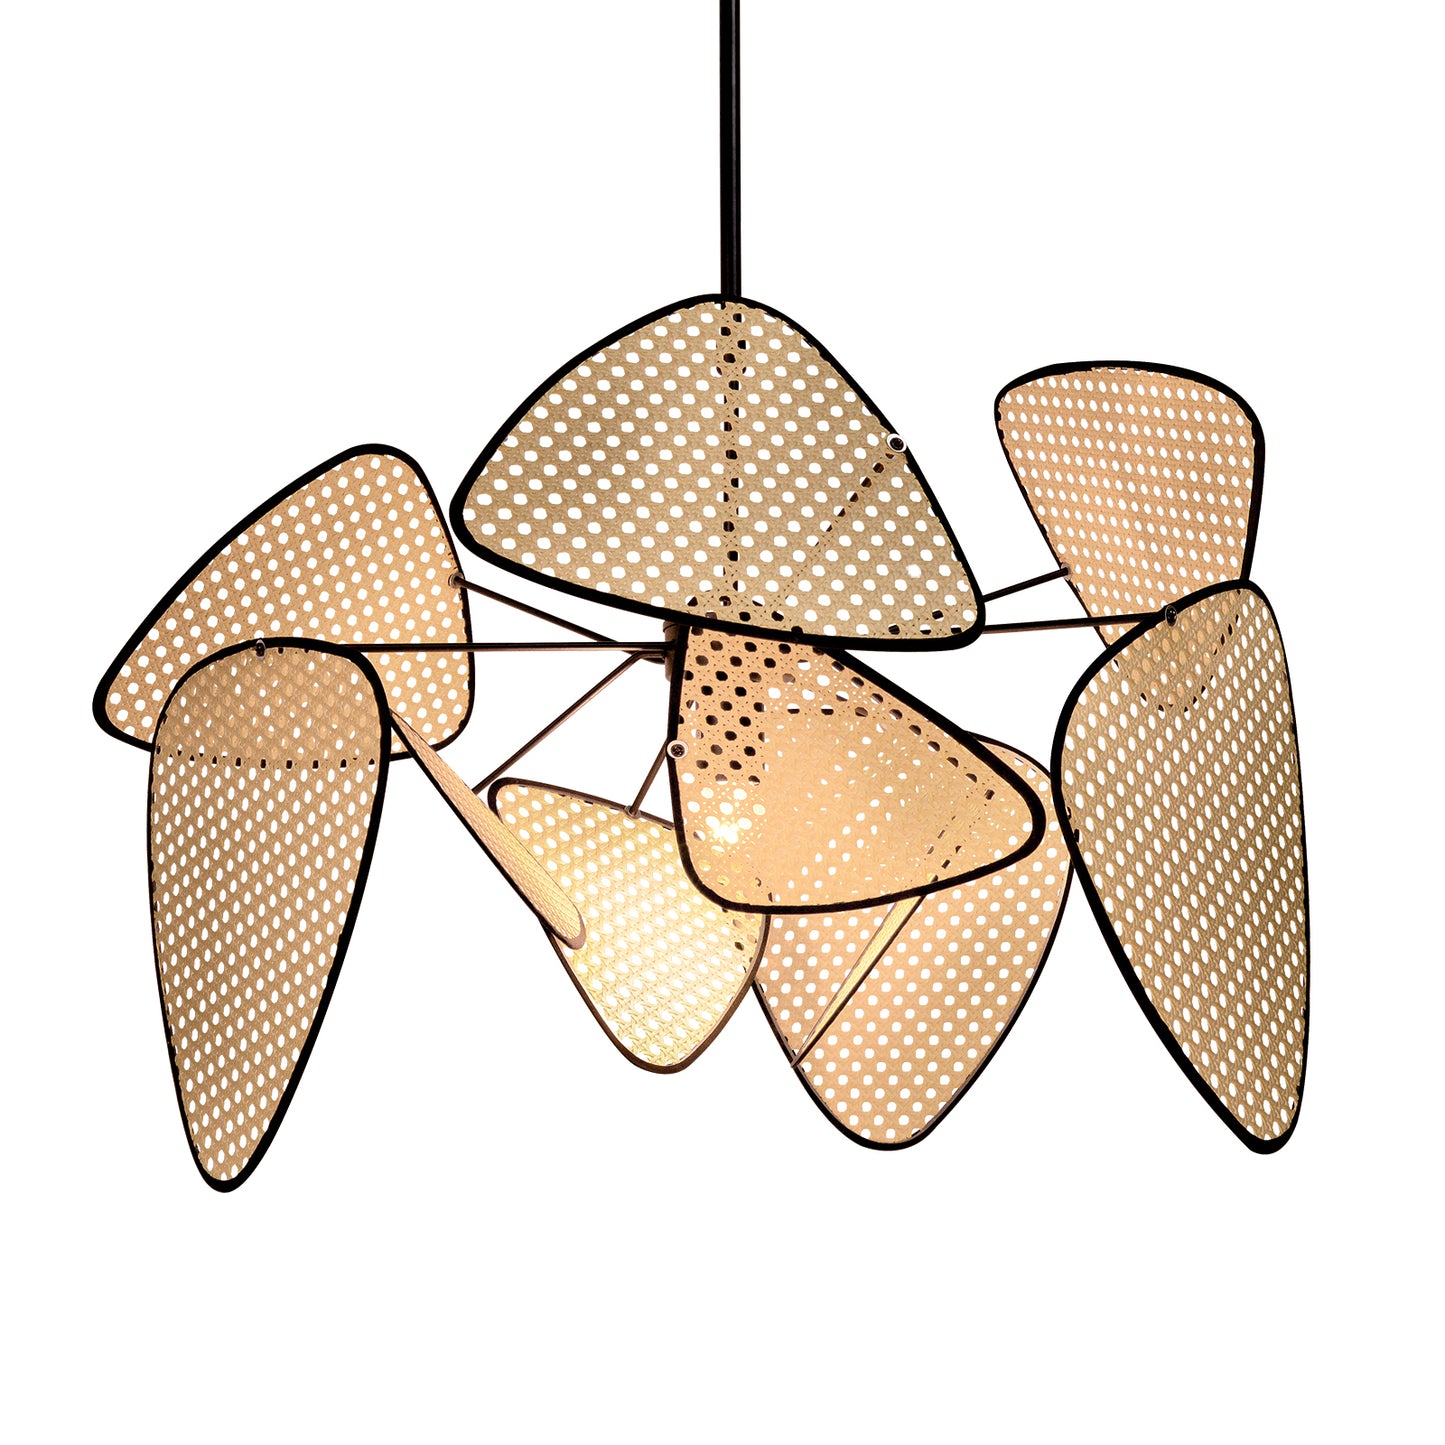 (M)Hollow Fan Blades Combination Rattan Pendant Light Shade For Bedroom Kitchen Island